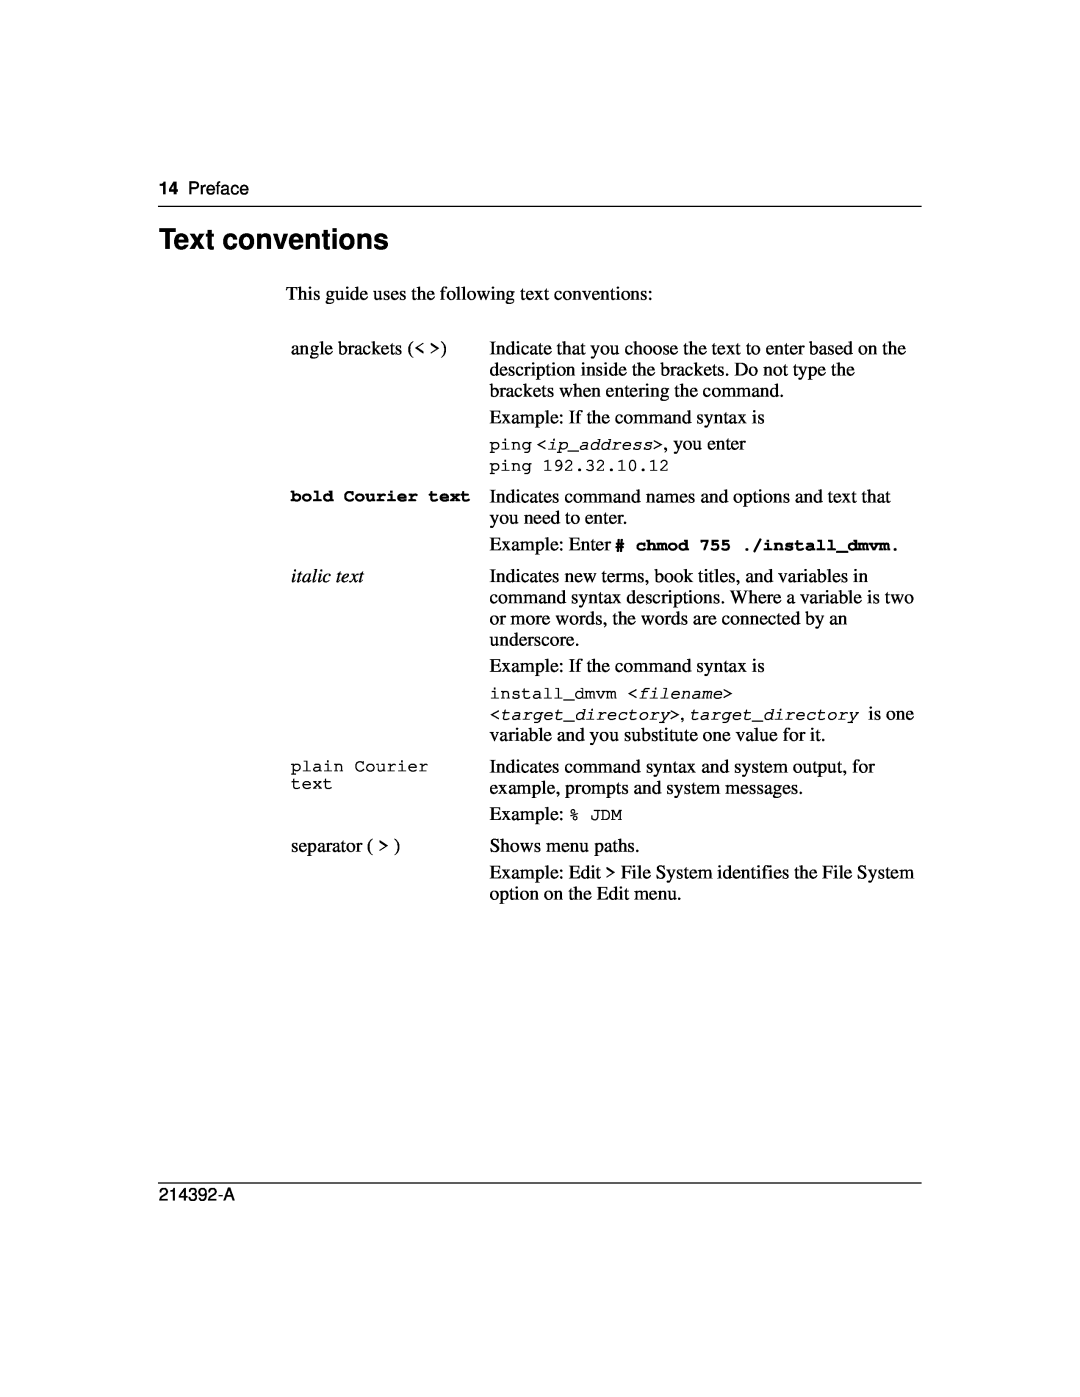 Nortel Networks 380-24F manual Text conventions, italic text 